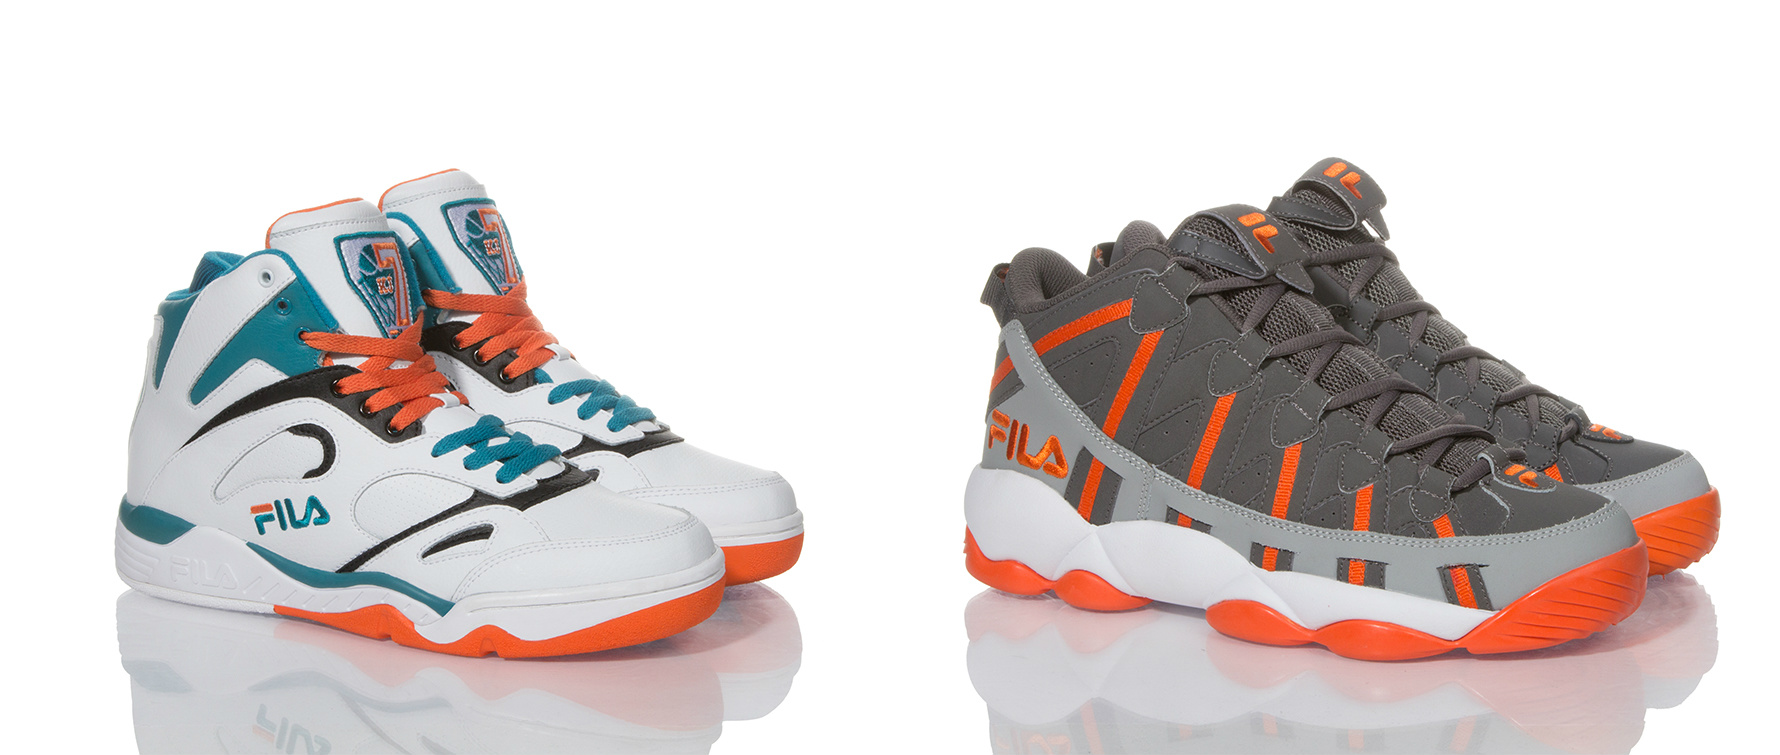 Sneakers Of The Day FILA Presents The MiamiInspired “Orange Pack